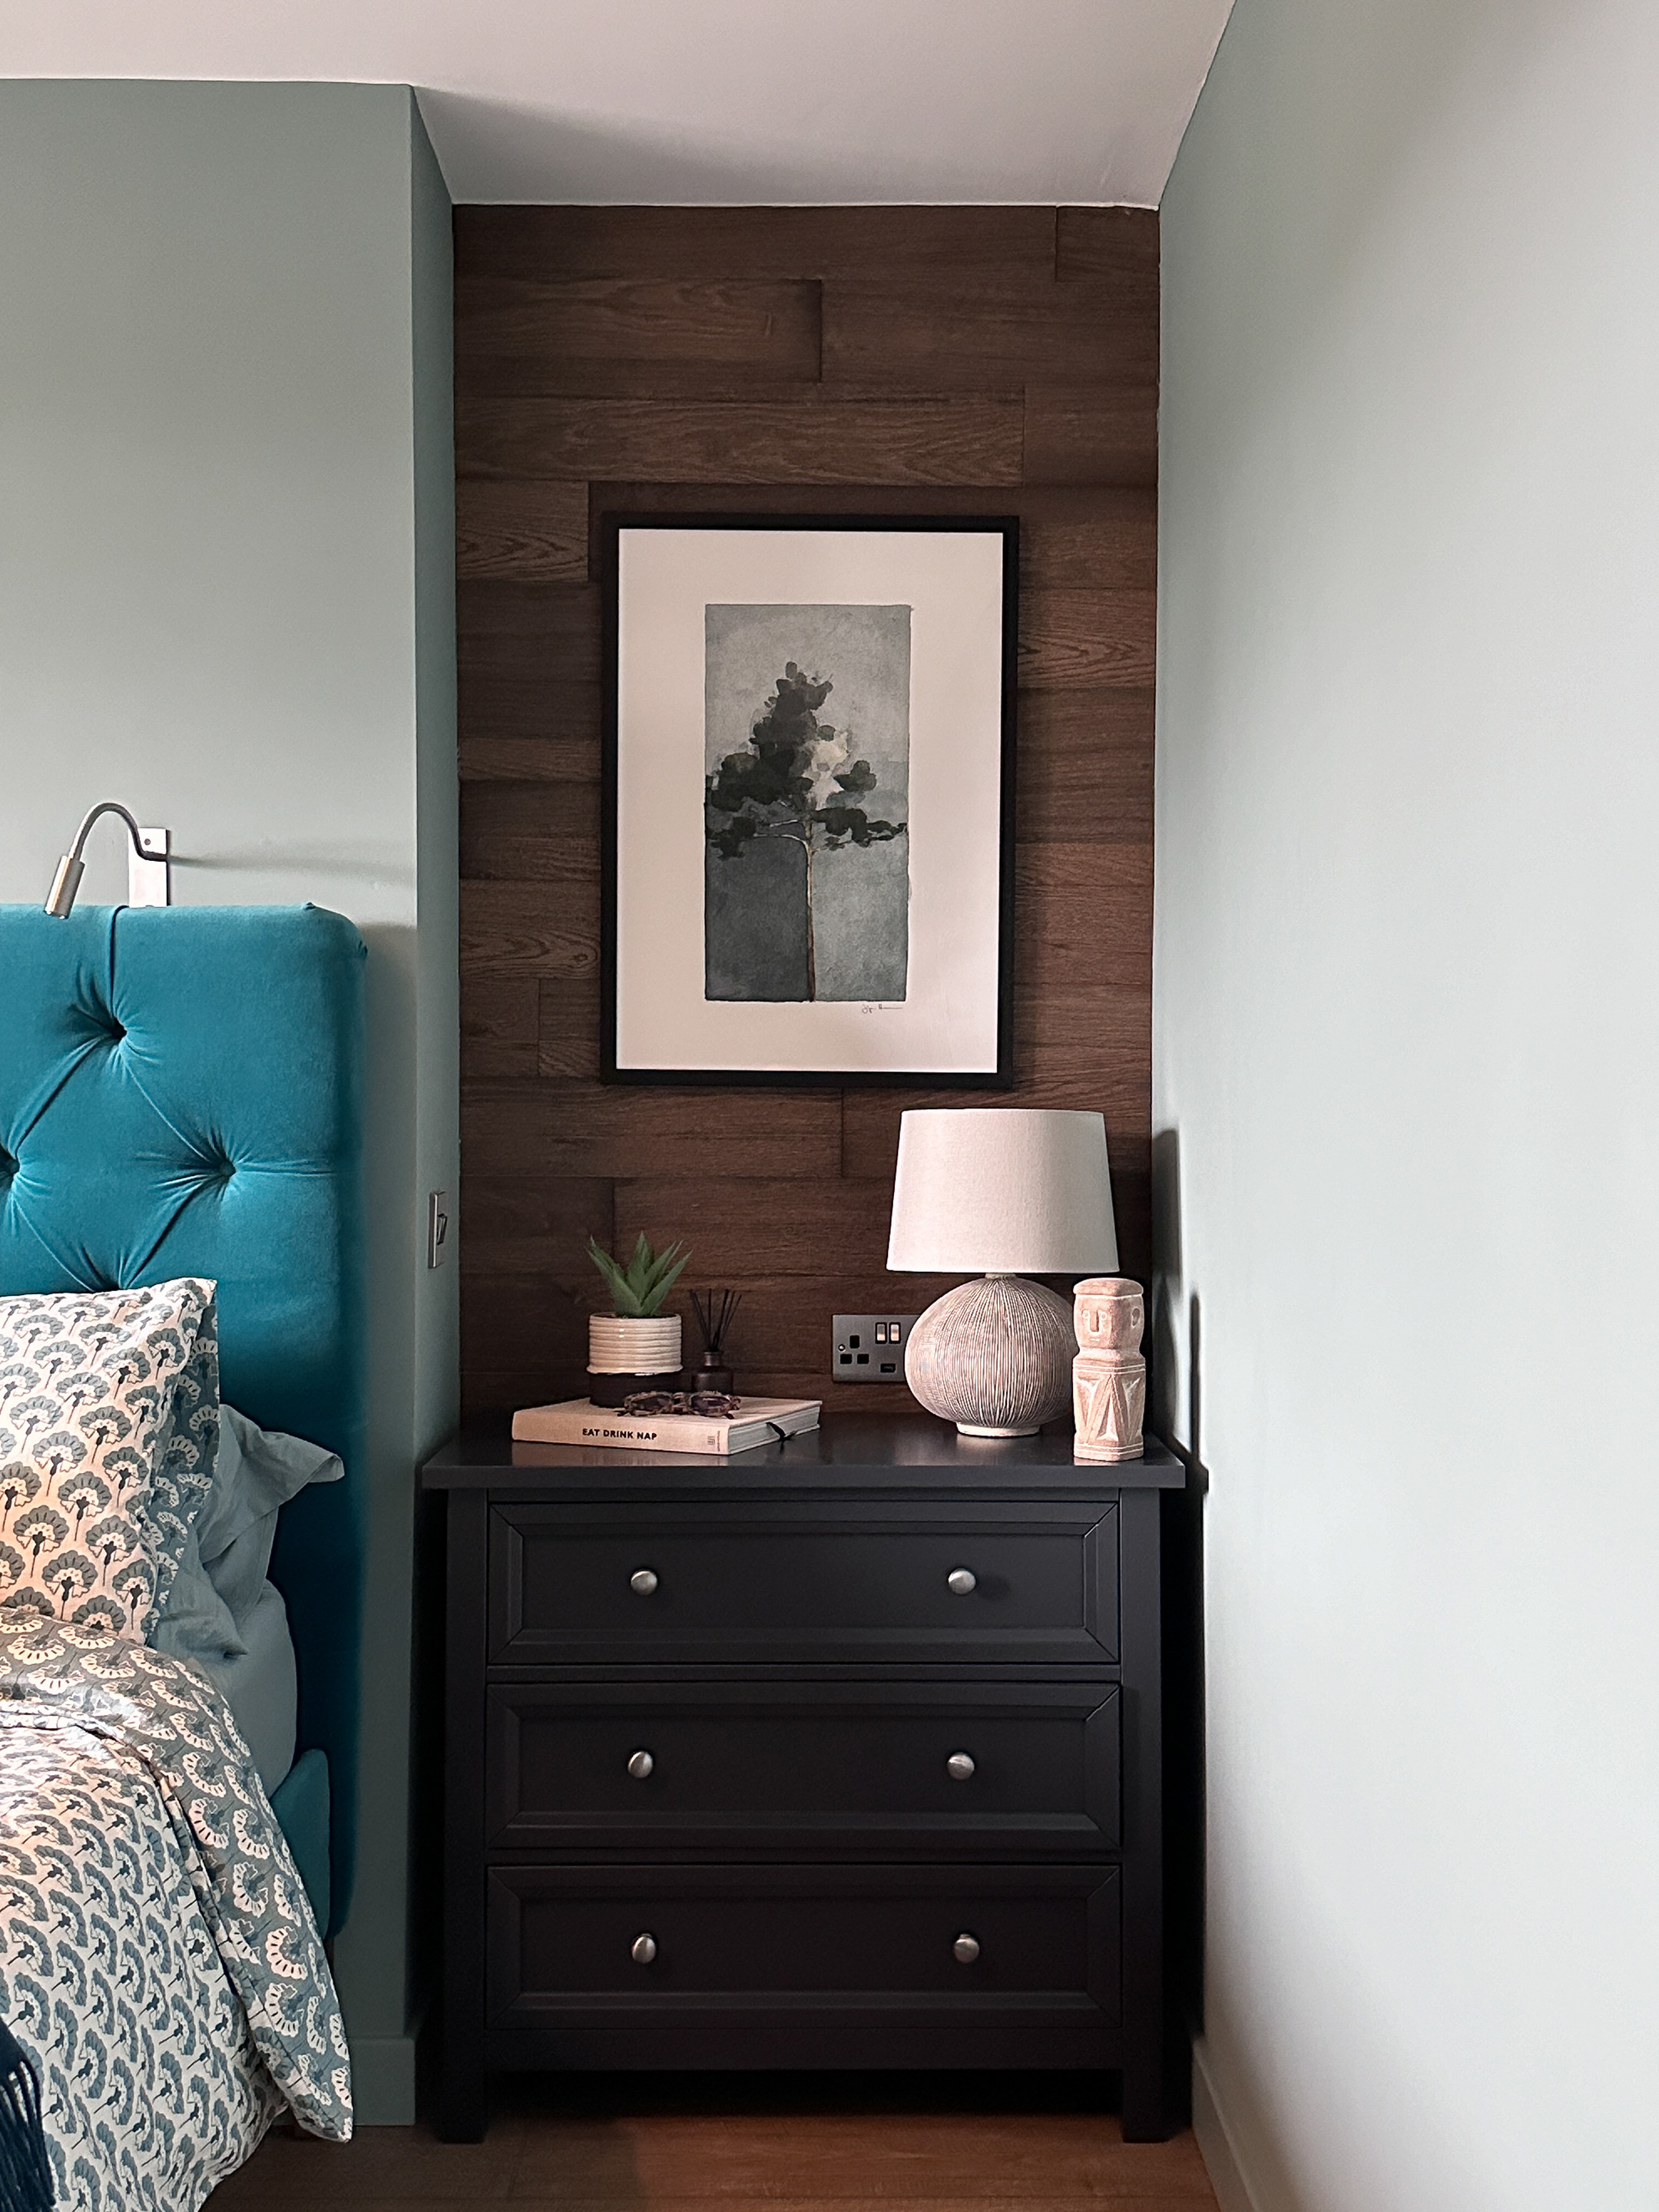 This picture shows a recess space beside the bed which has been panelled in rustic wood at the back, against walls painted in Farrow and Ball Oval Room Blue, a grey green blue, with a black chest of drawers and ceramic lamp.